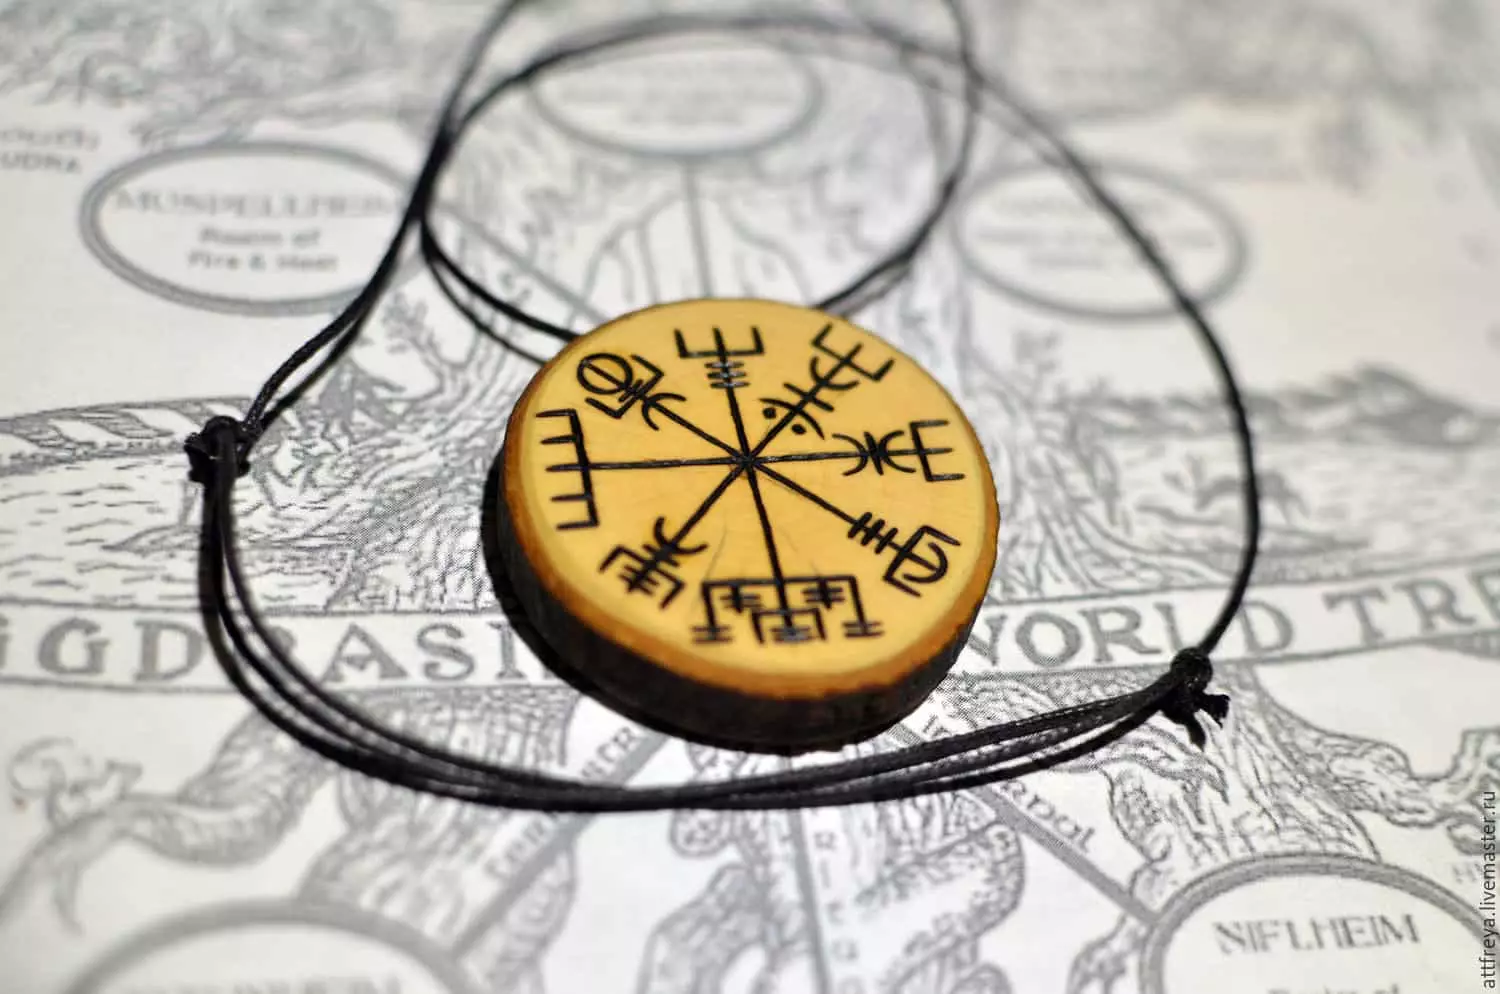 Runic Compass Veggizir – Pointer of the Right Way